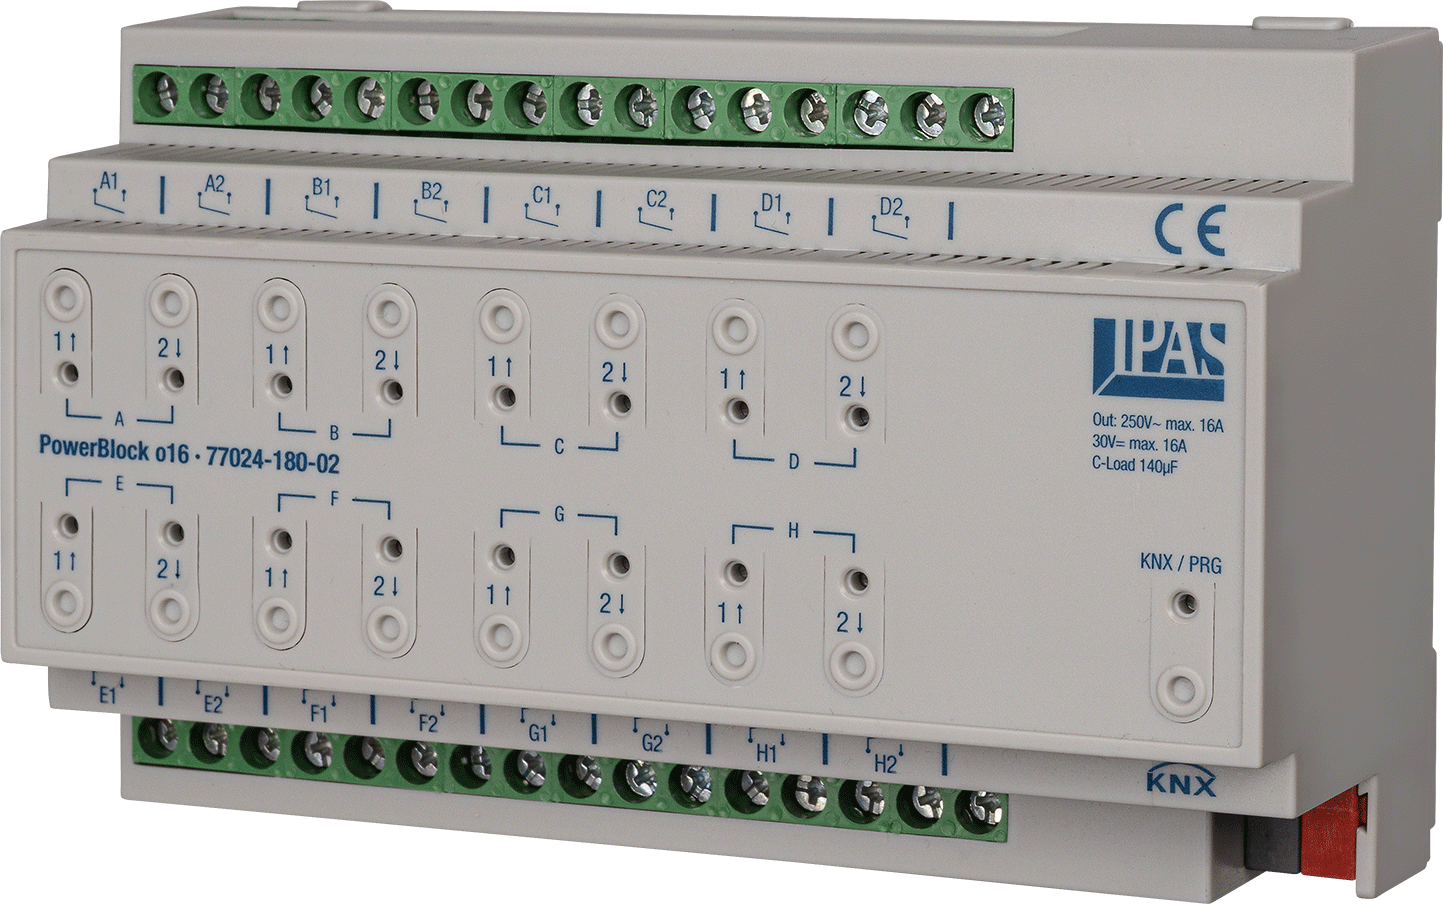 KNX multifuntion actuator, PowerBlock o16, shutter / switching, 16 binary outputs / 8 channel shutter, 16A, 140µF C-load, DIN rail, serie PowerBlock, Ref. 77024-180-02